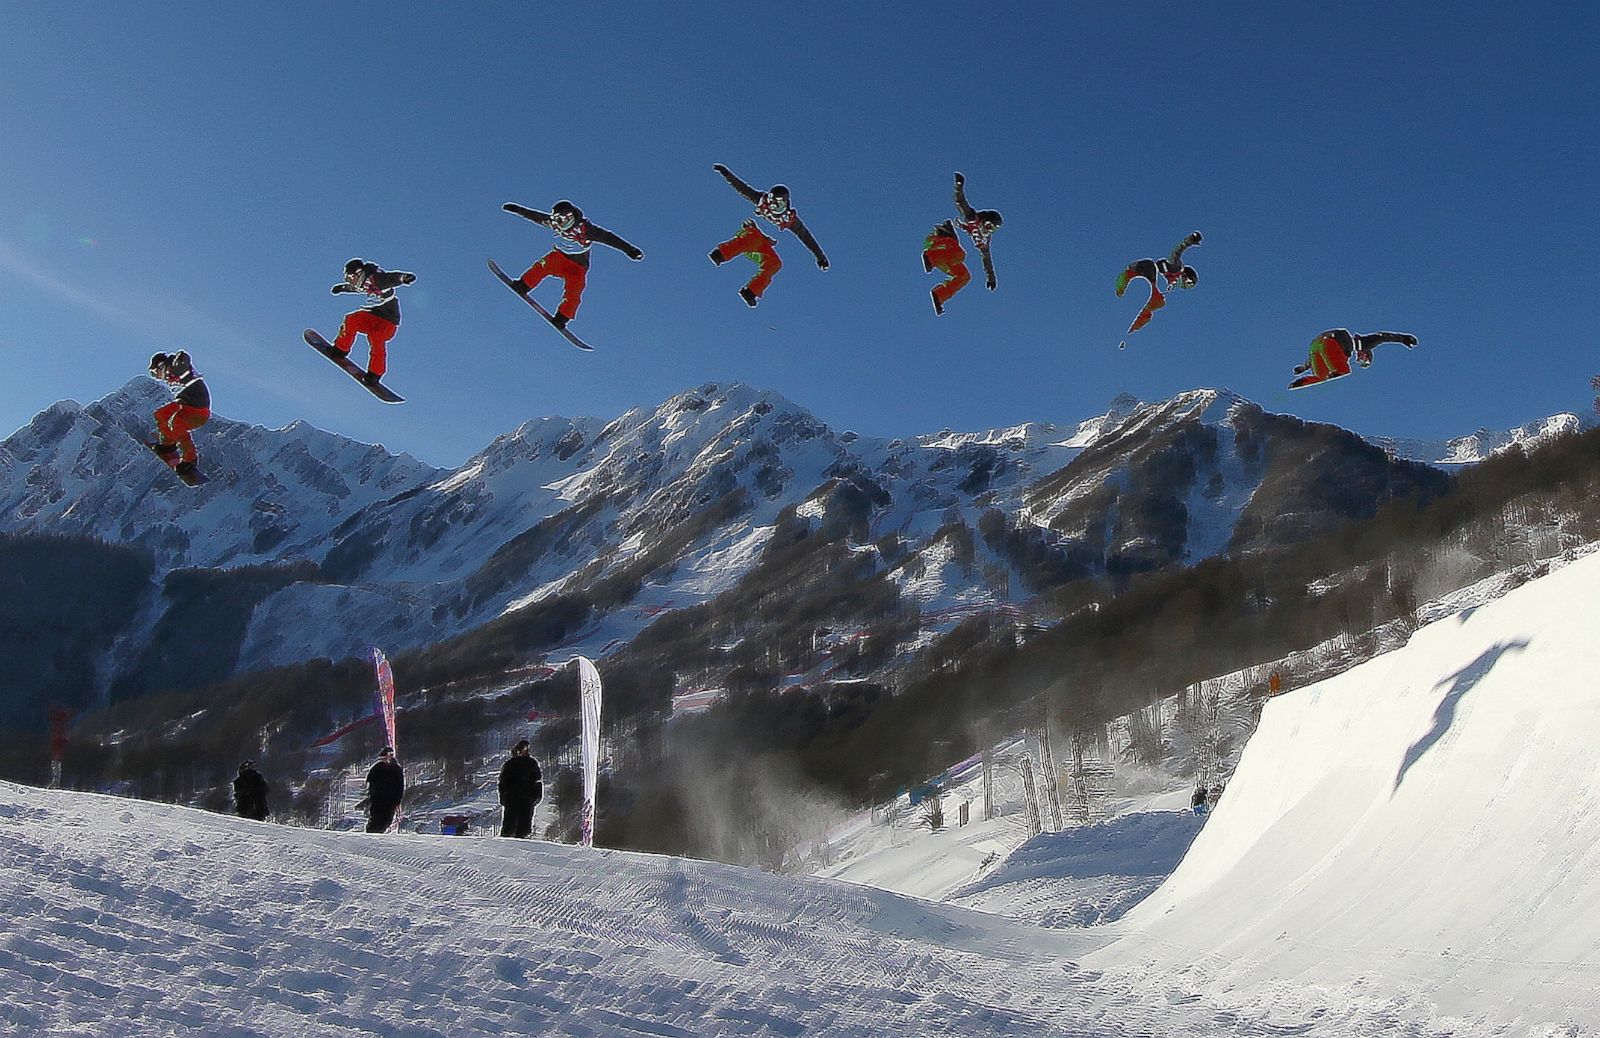 Multiple Exposures from Sochi Photos | Image #8 - ABC News1600 x 1038